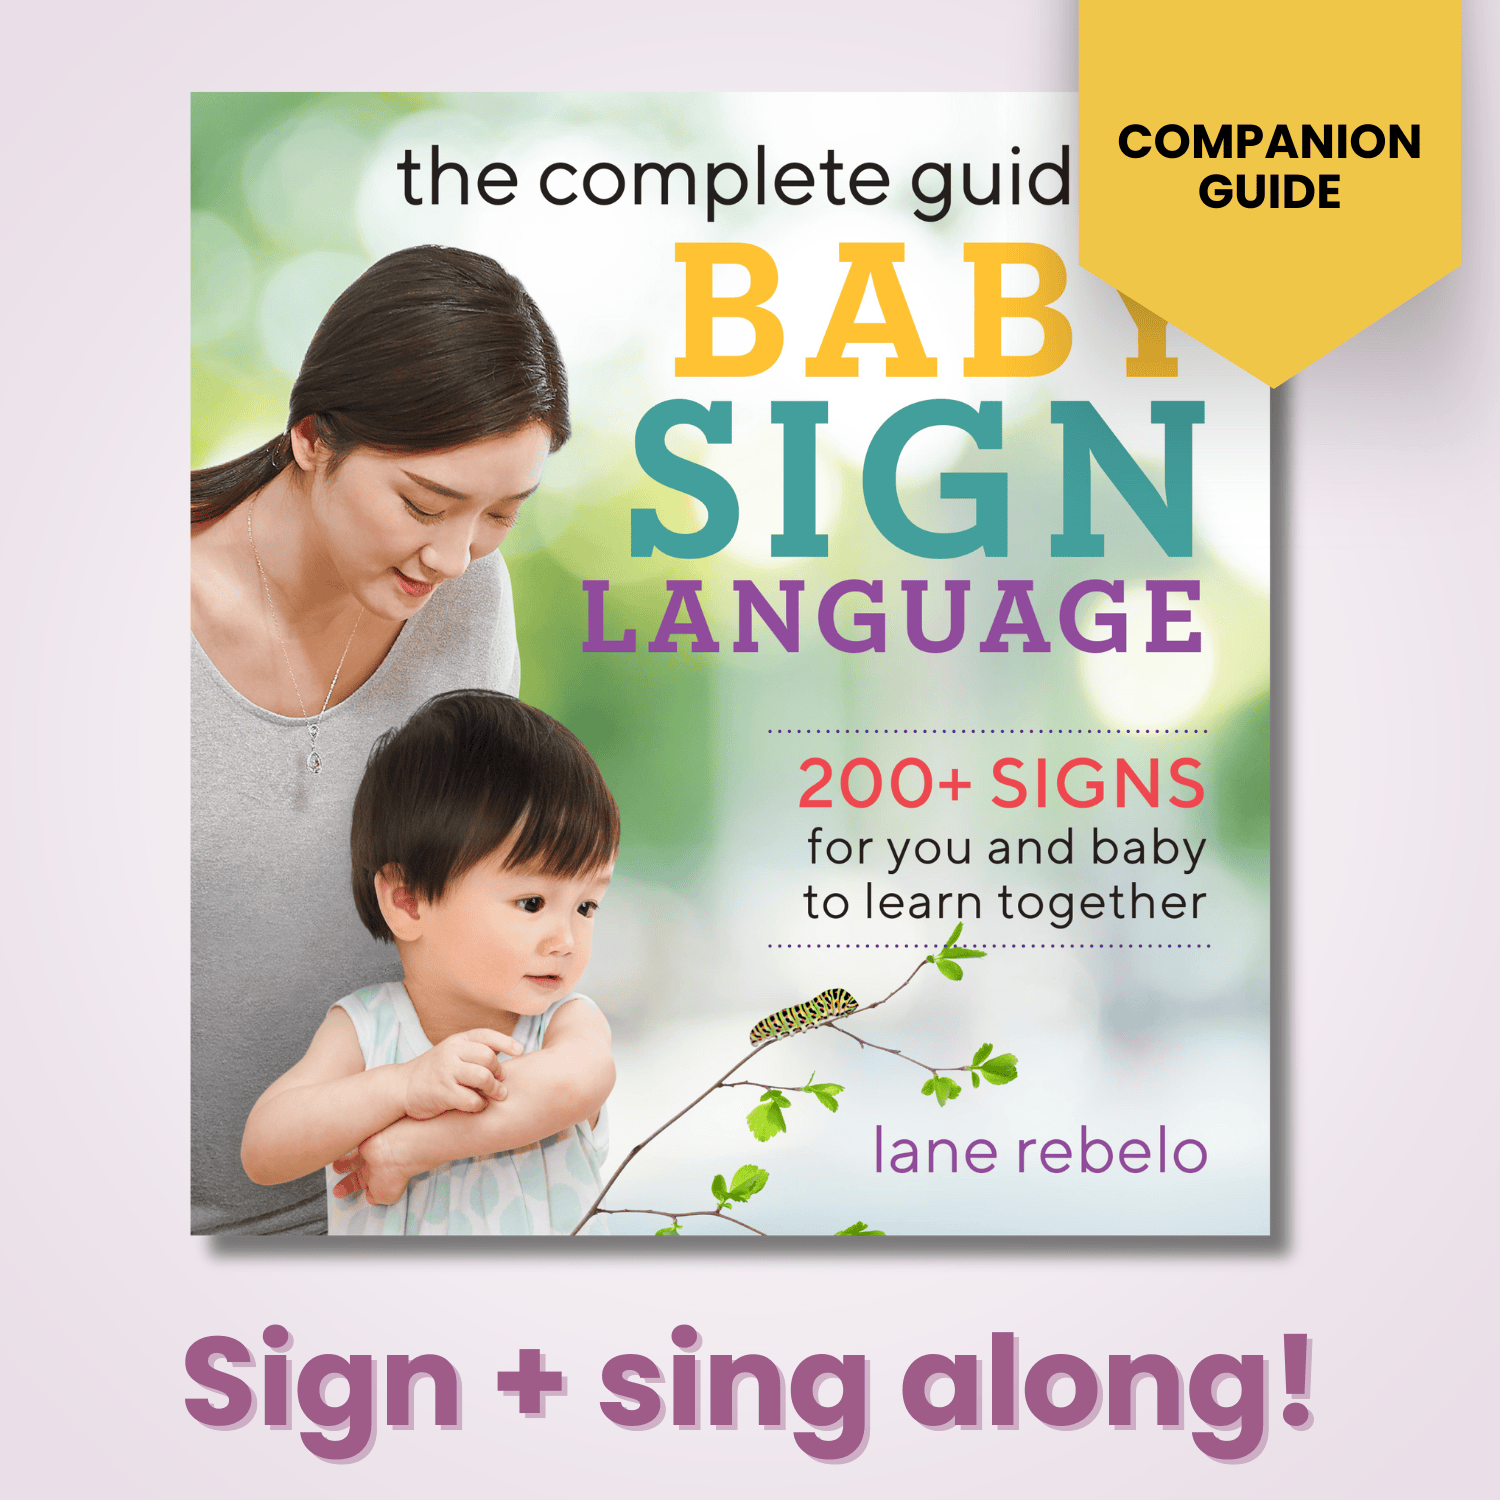 The Complete Guide to Baby Sign Language: Companion Guide